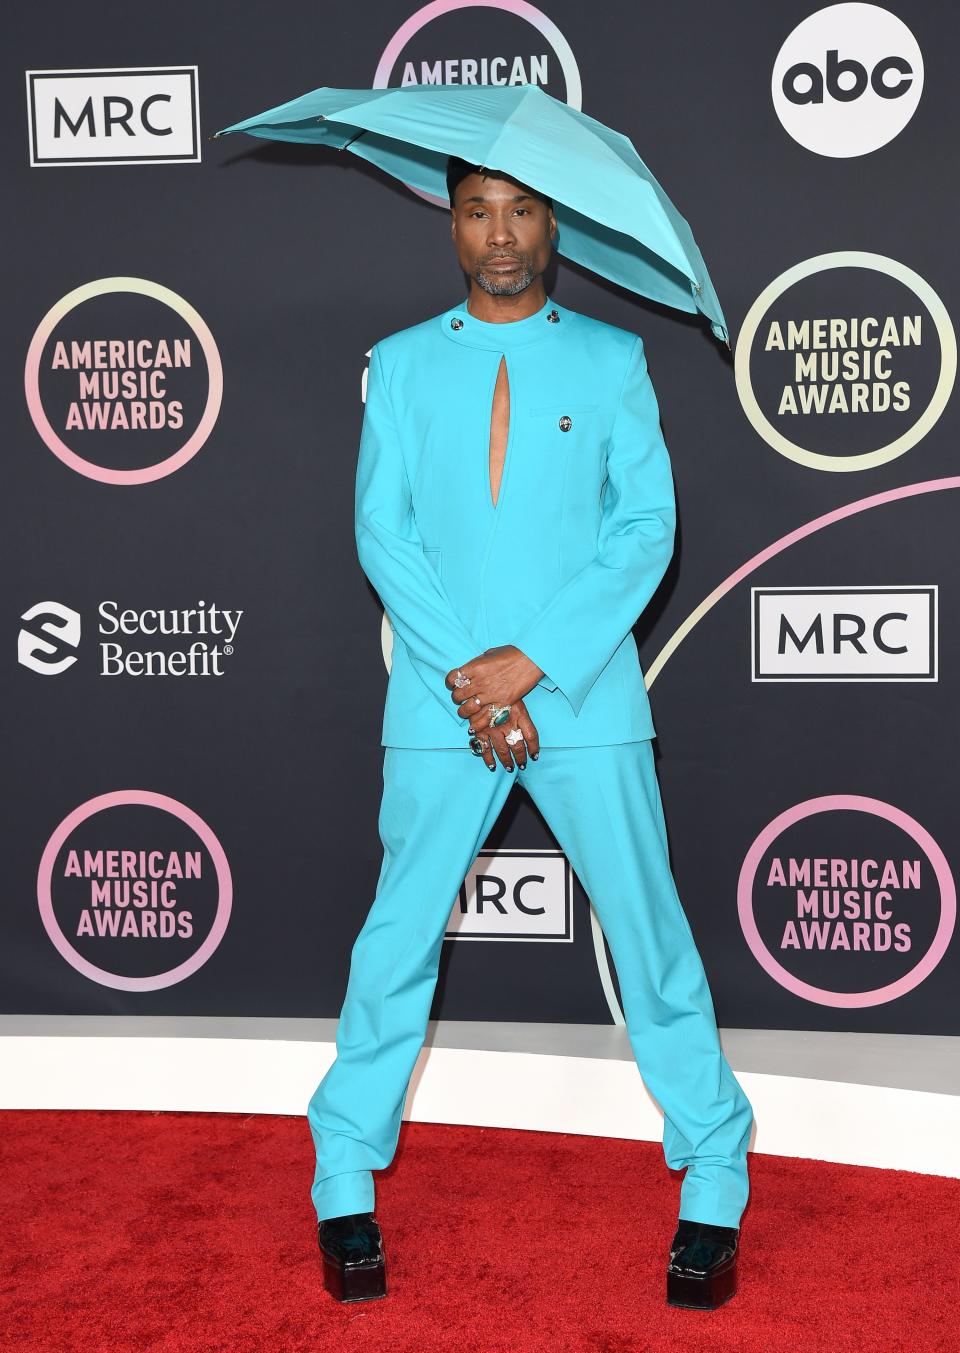 Billy Porter at the 2021 American Music Awards.